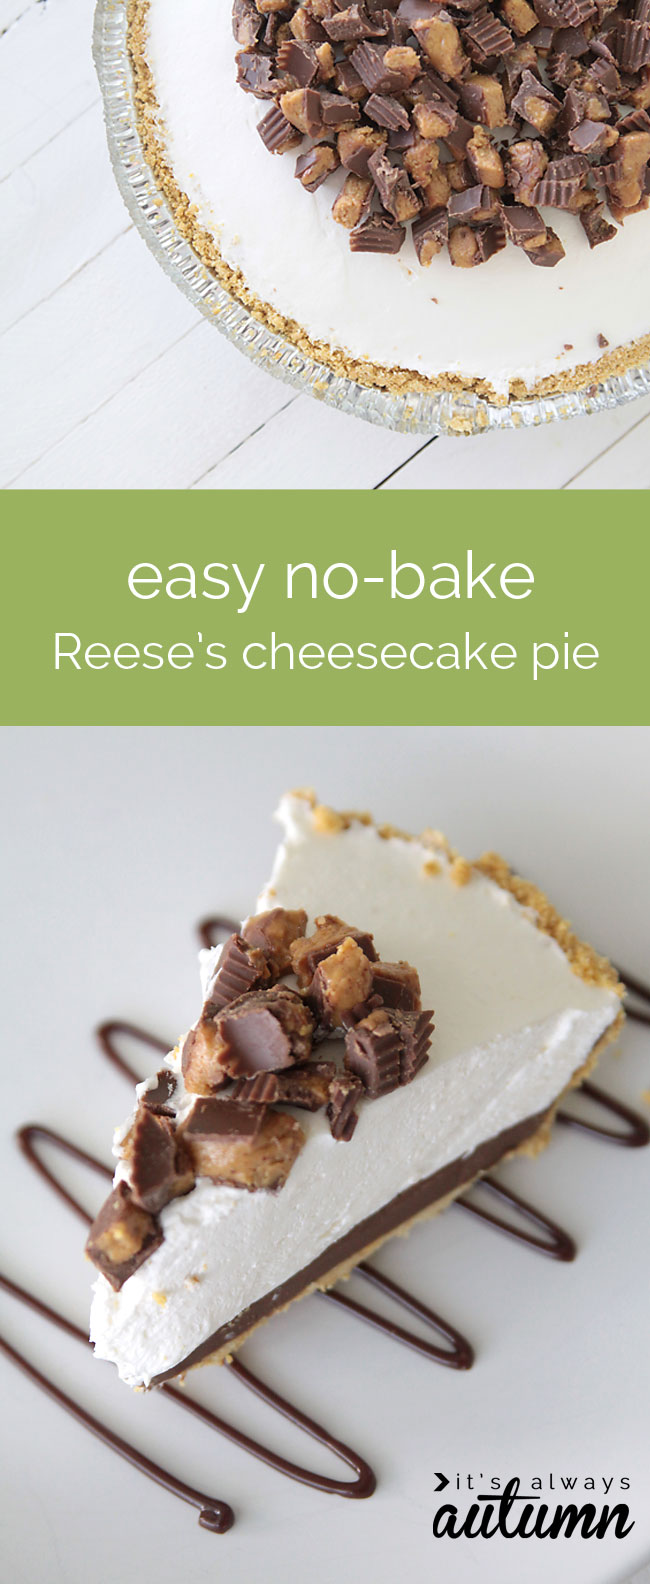 super easy recipe for a no bake reese's cheesecake pie - the best!